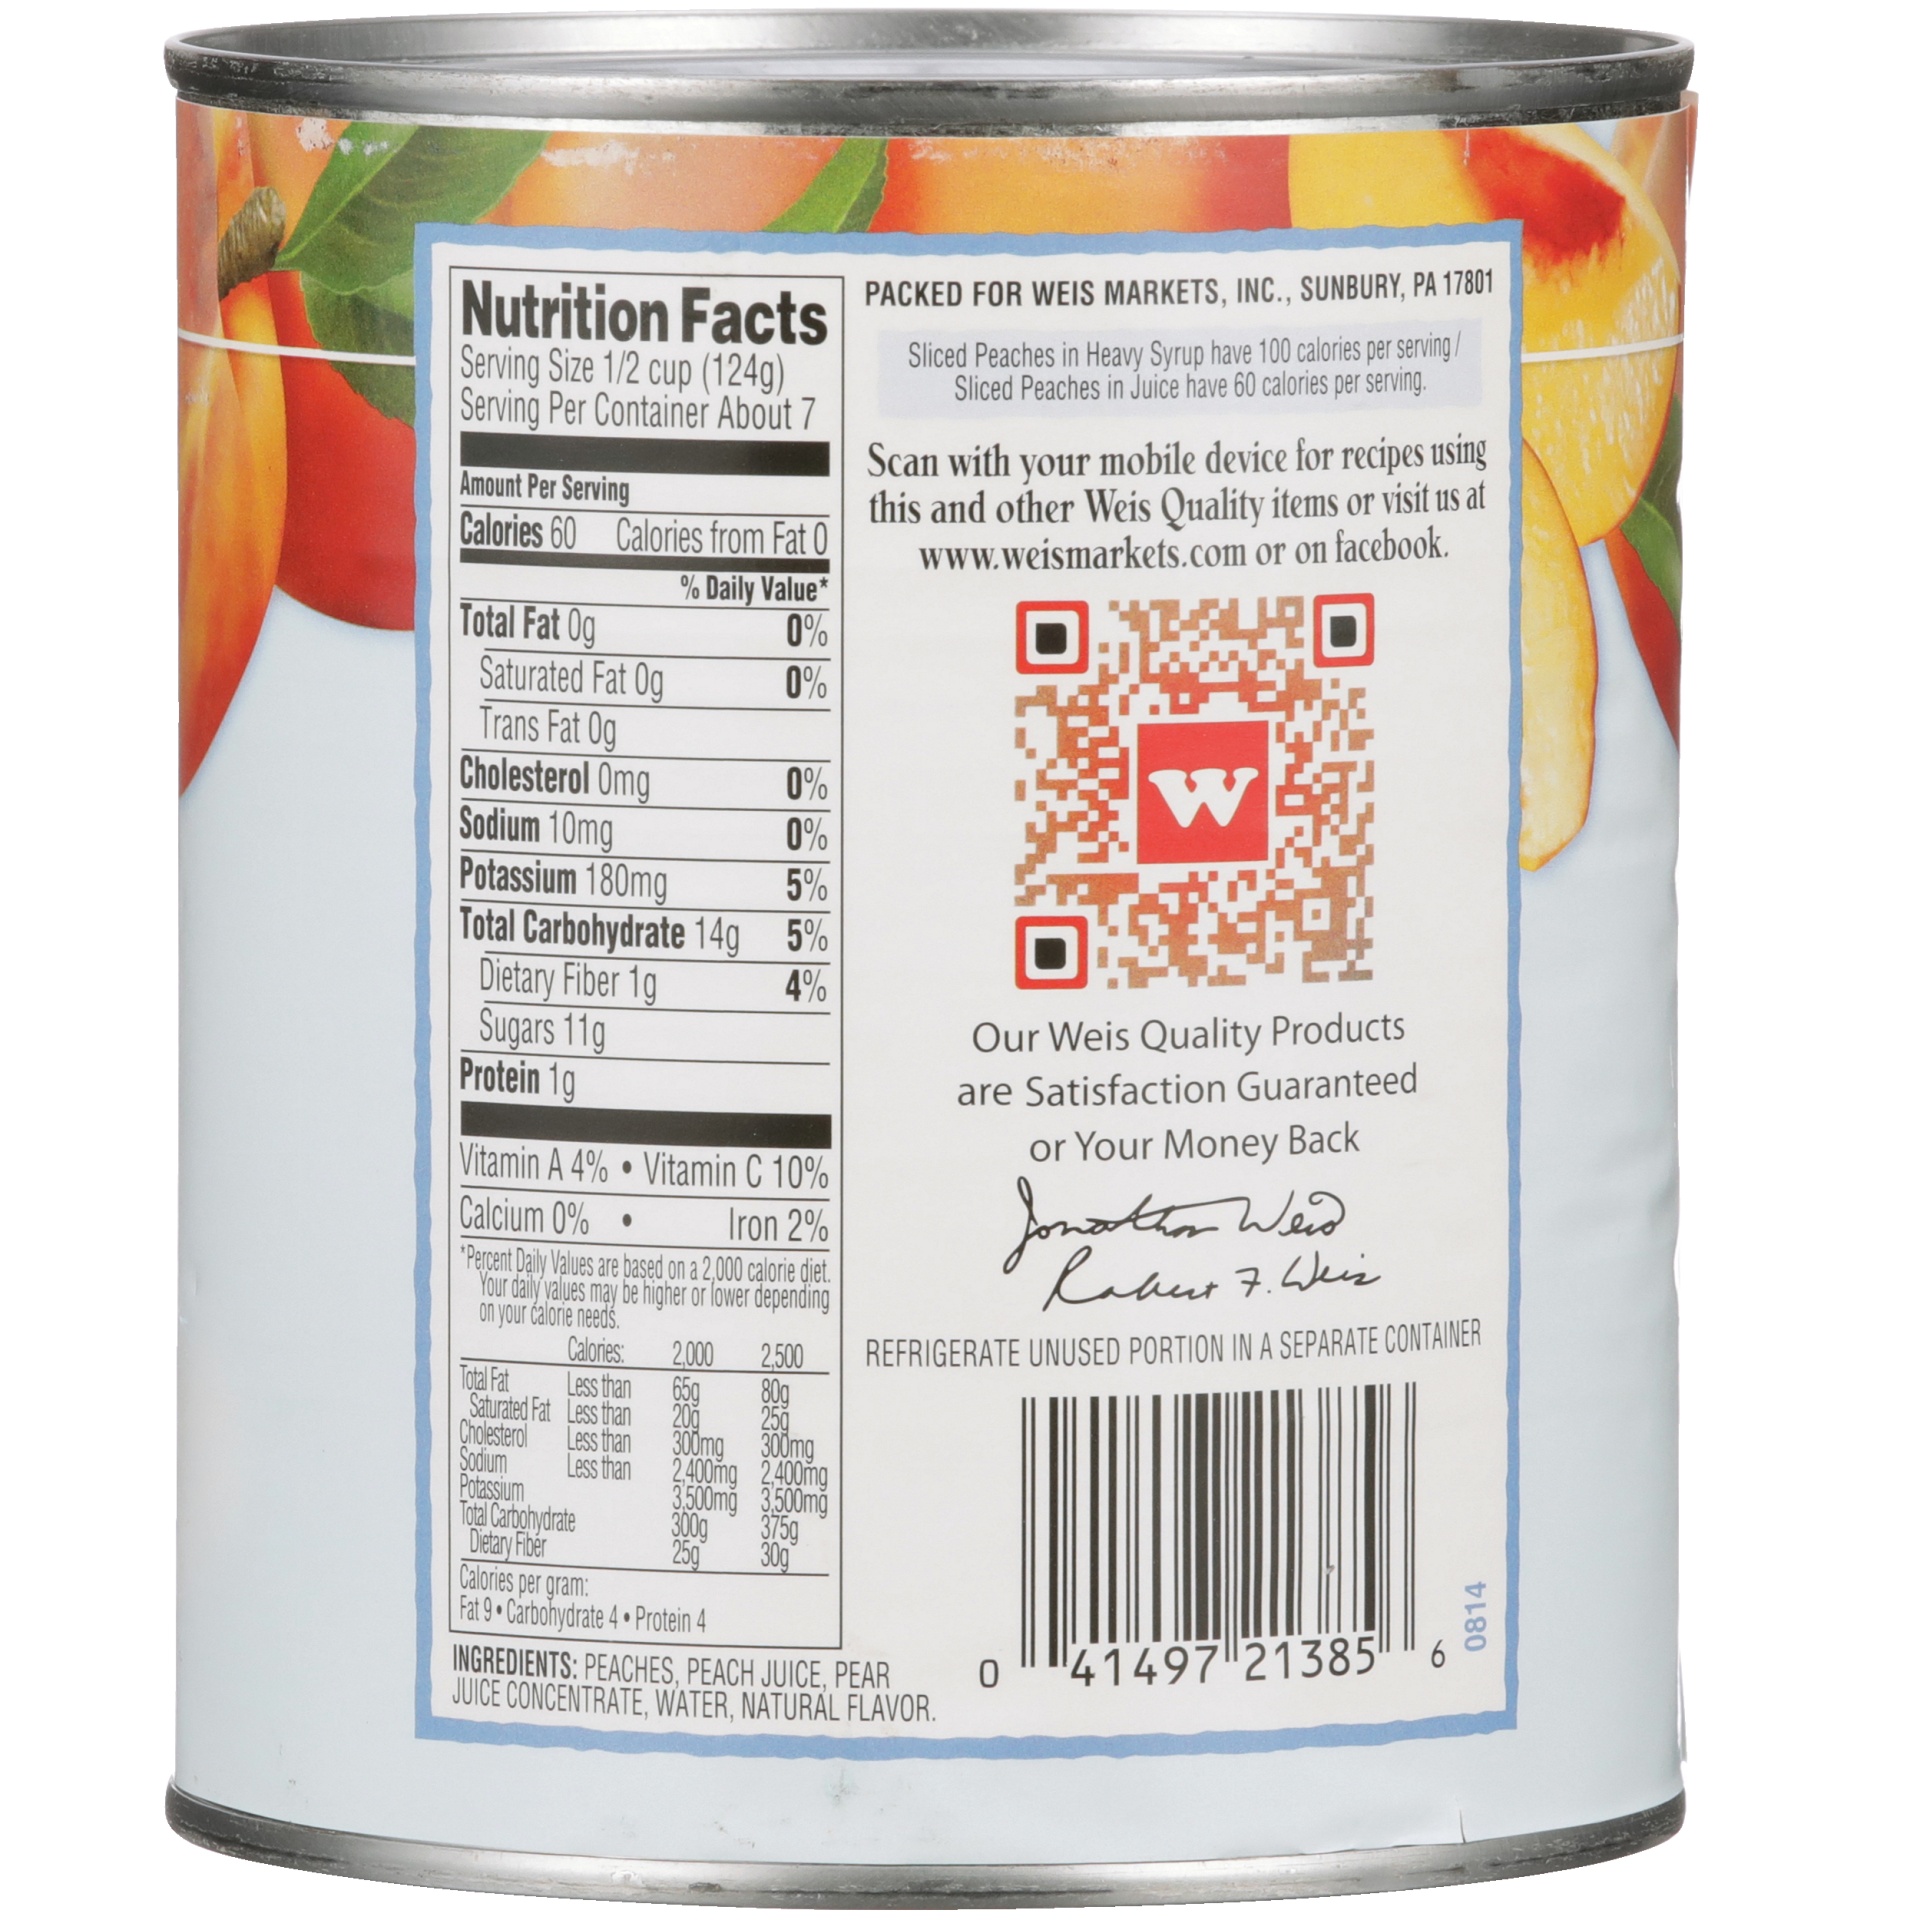 slide 6 of 6, Weis Quality Yellow Cling Sliced Peaches in 100% Juice Canned Fruit, 29 oz